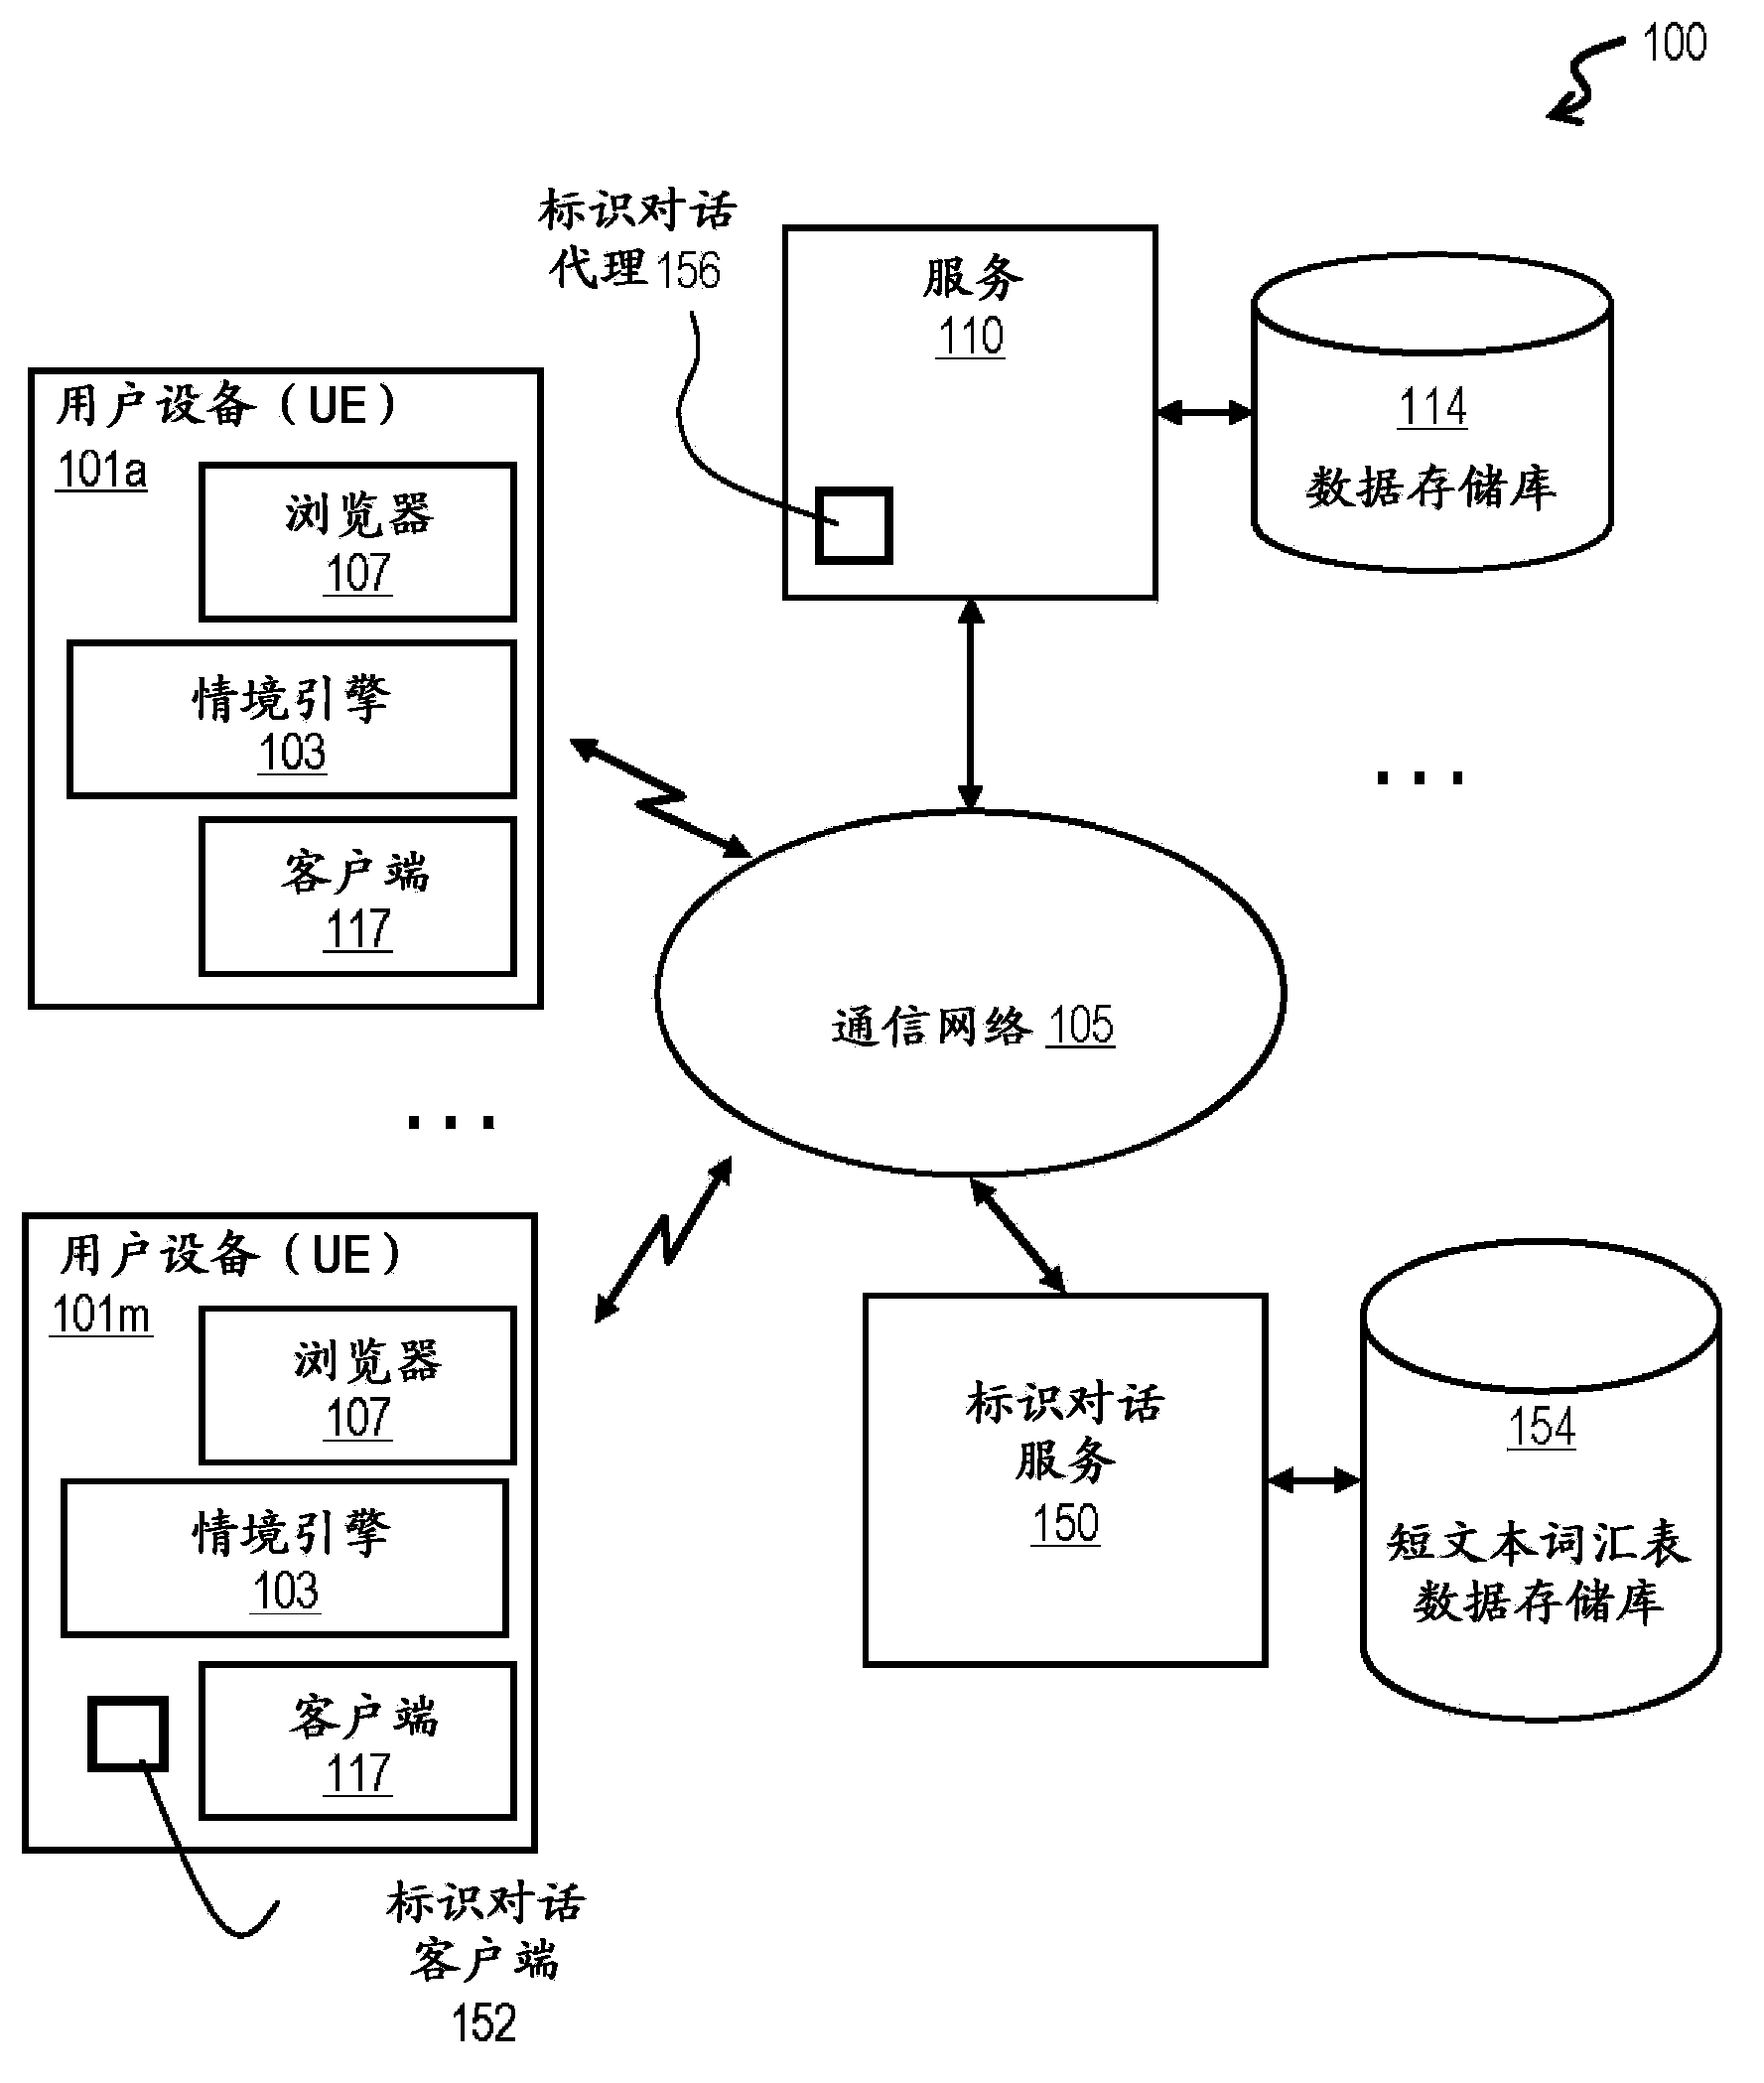 Method and apparatus for identifying conversation in multiple strings